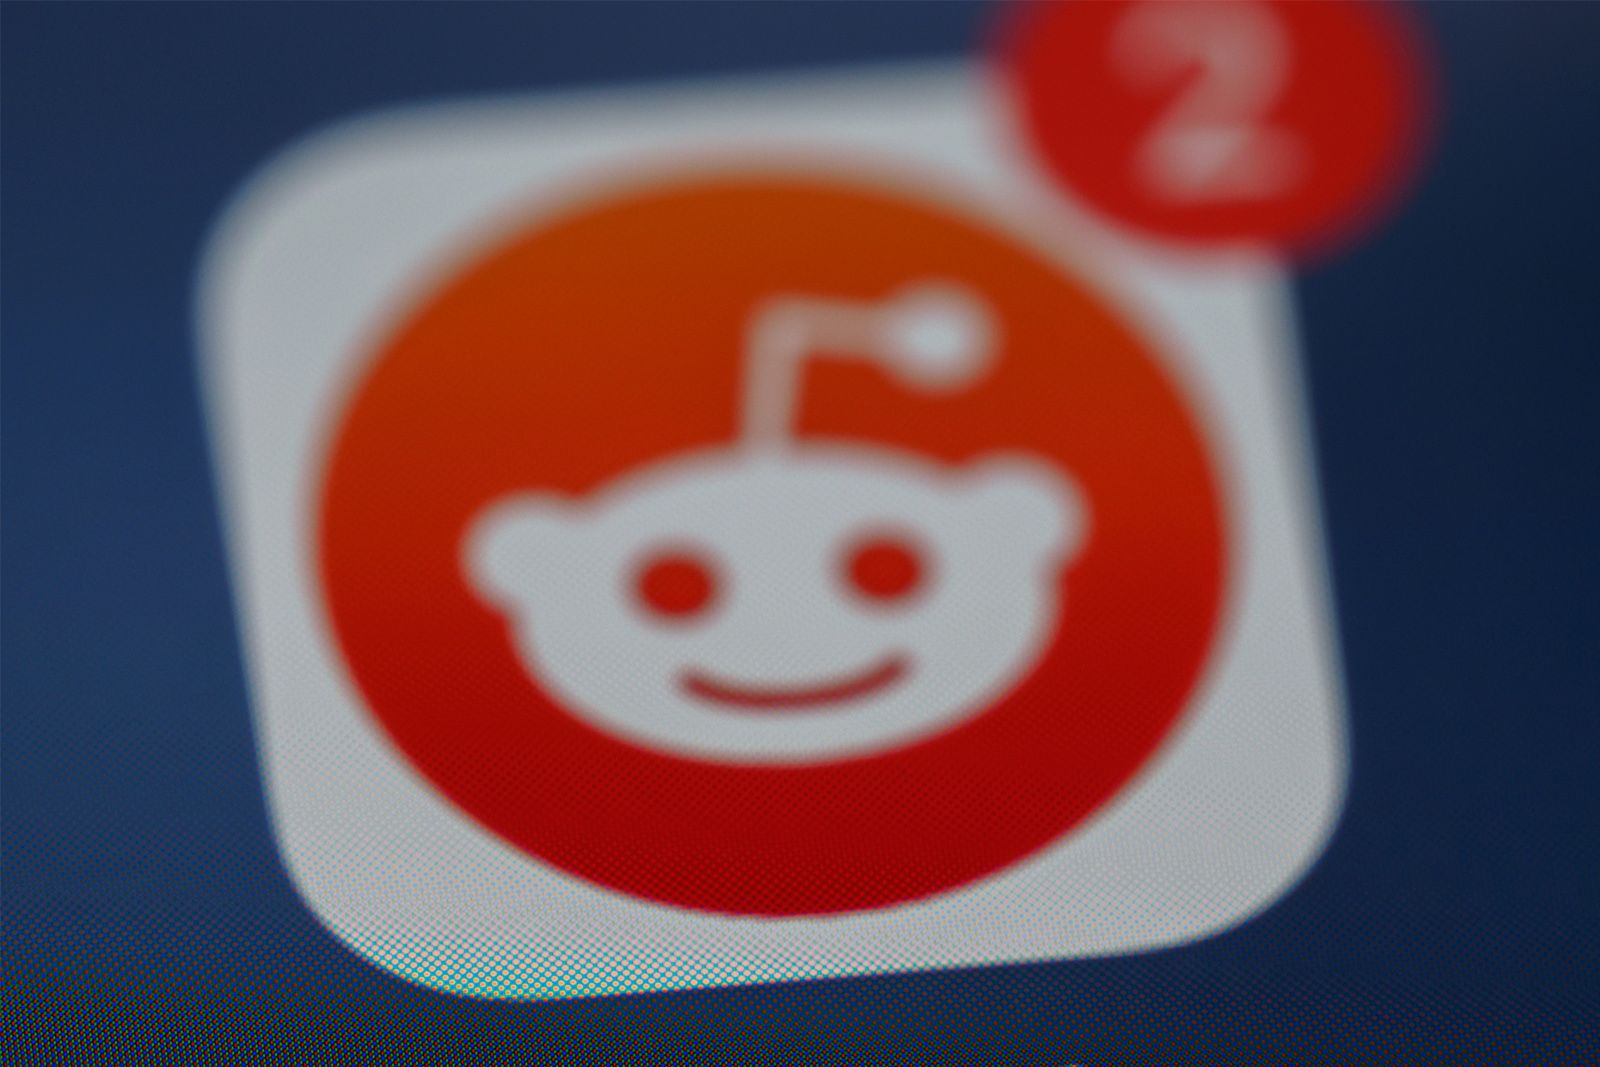 Reddit app logo zoomed in on an iPhone